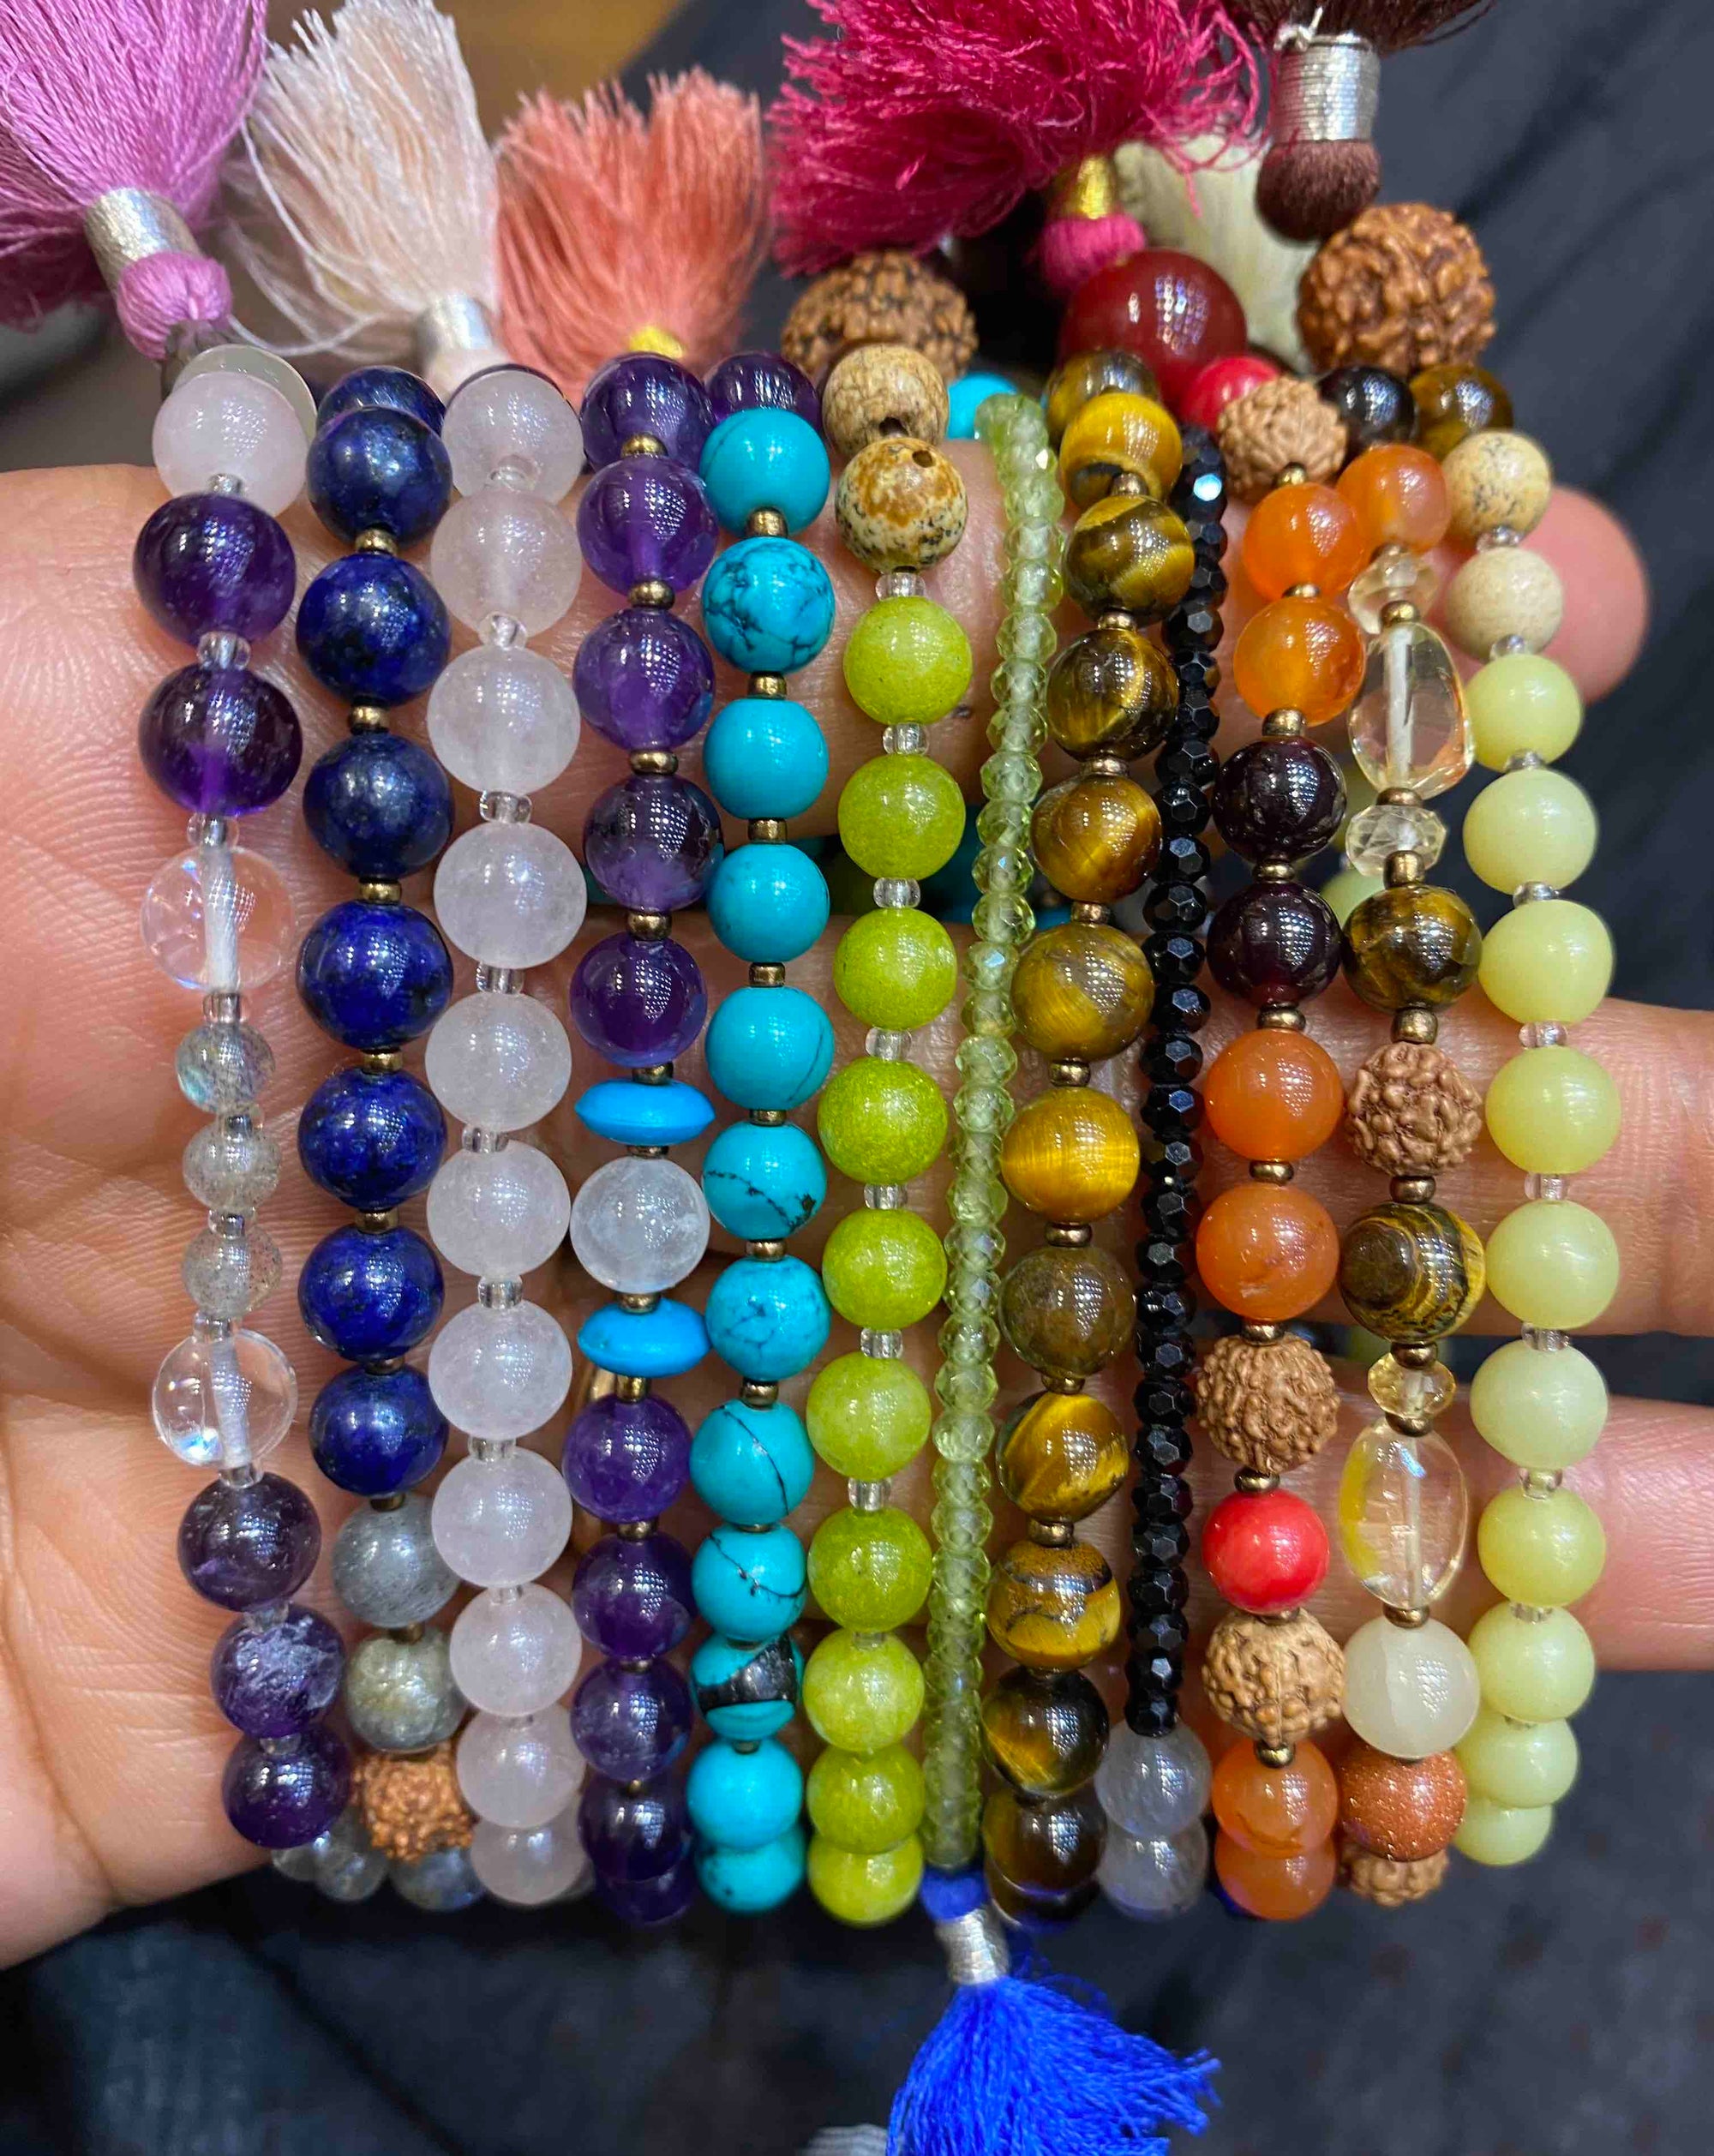 Fall In Love With Our Beads!